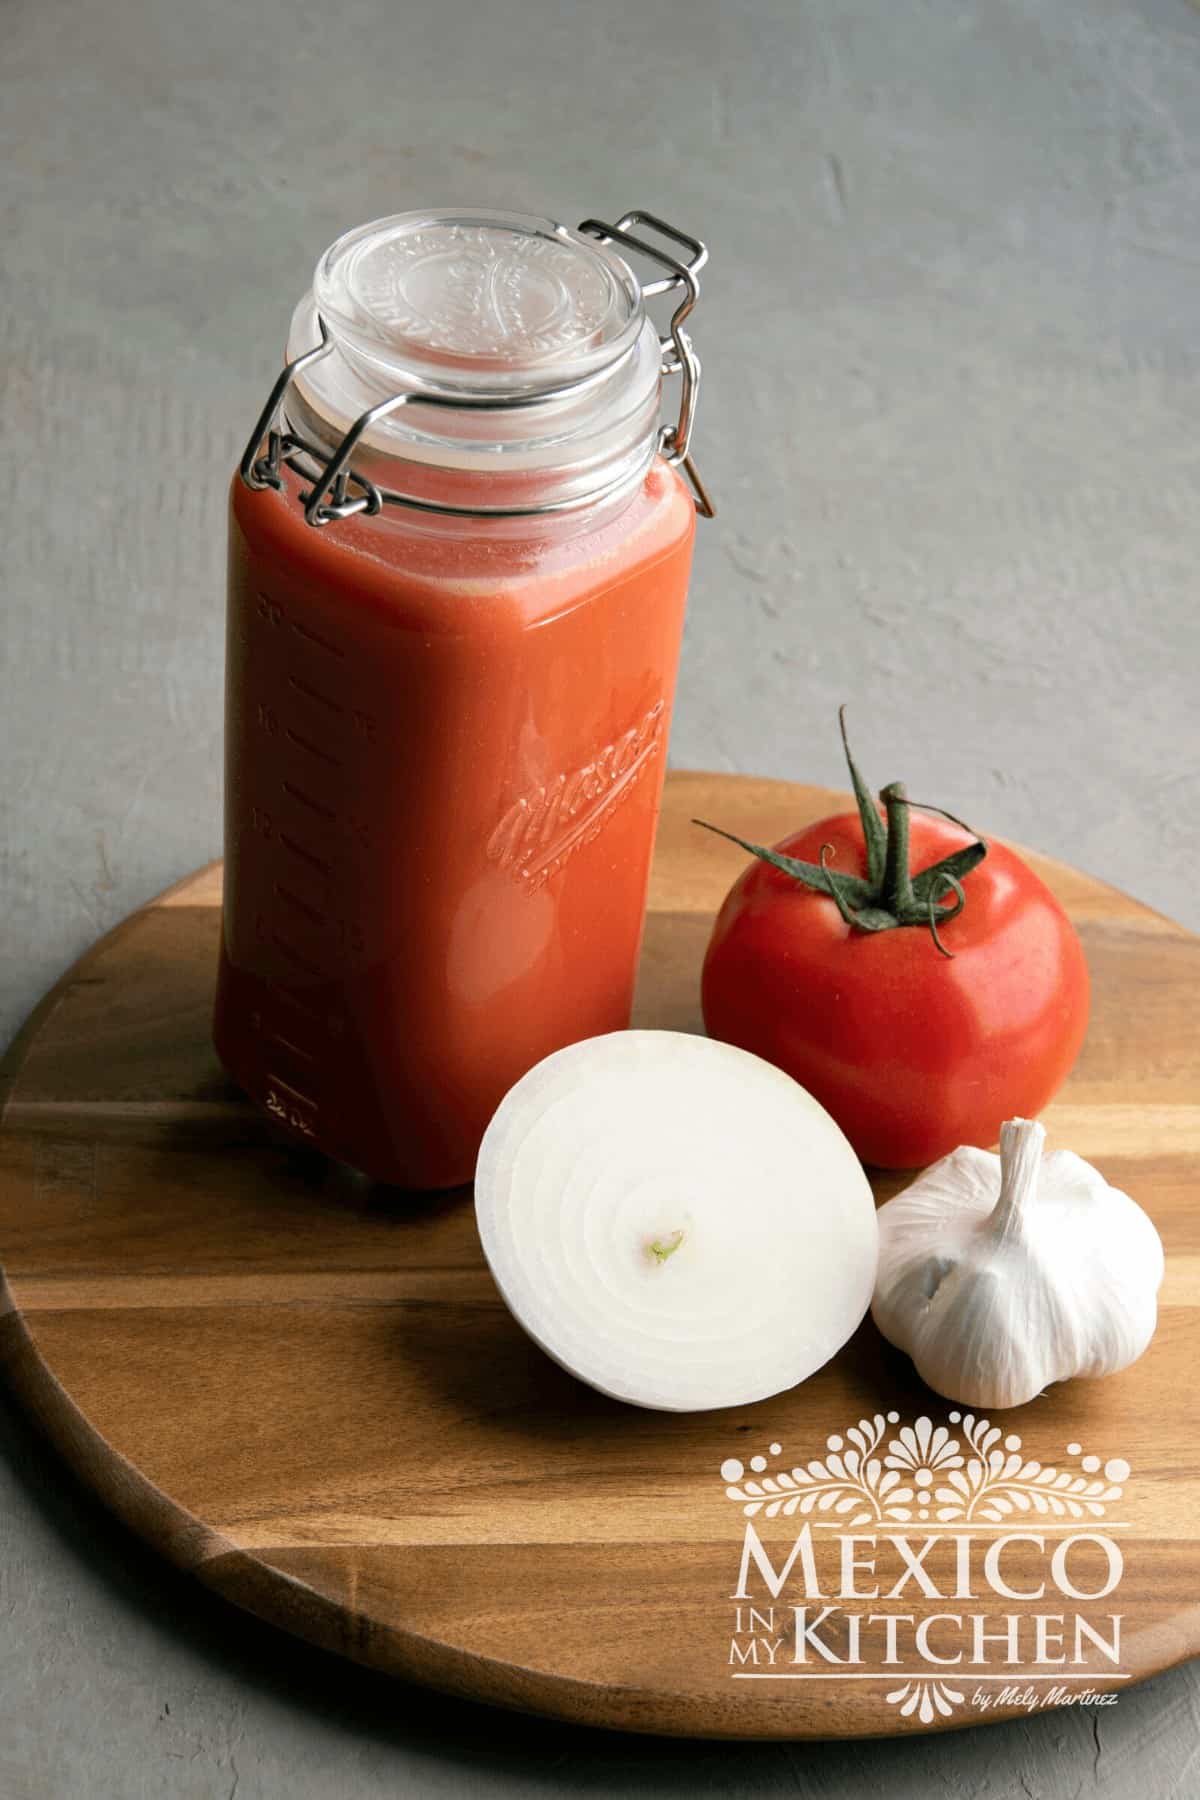 Jar with tomato sauce next to tomatoes, onions and garlic.